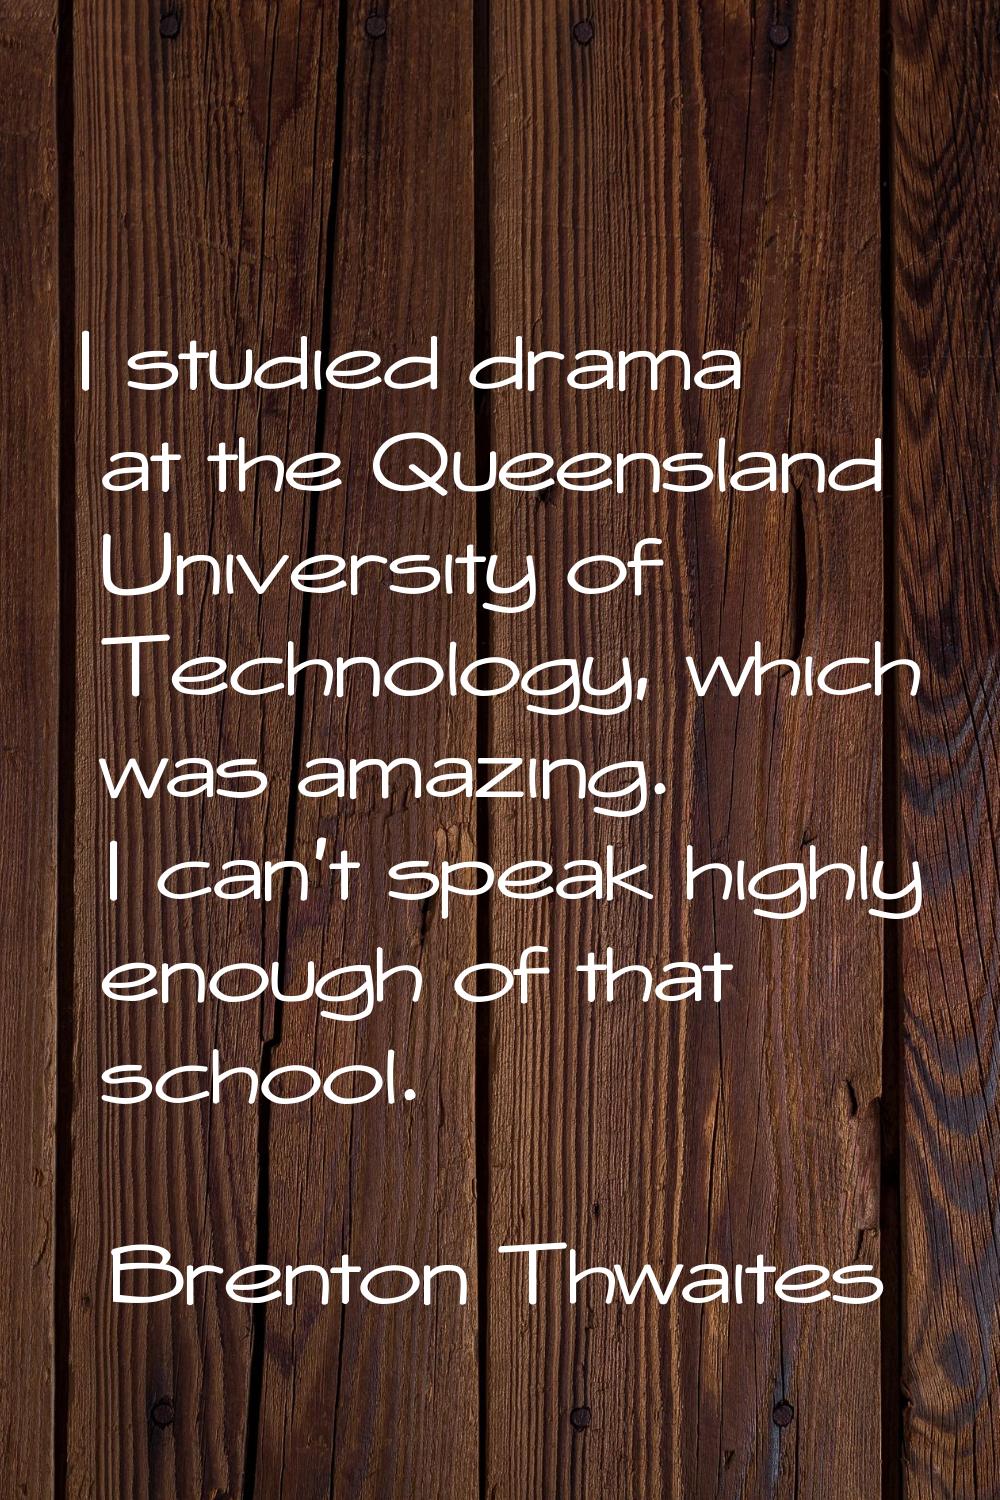 I studied drama at the Queensland University of Technology, which was amazing. I can't speak highly